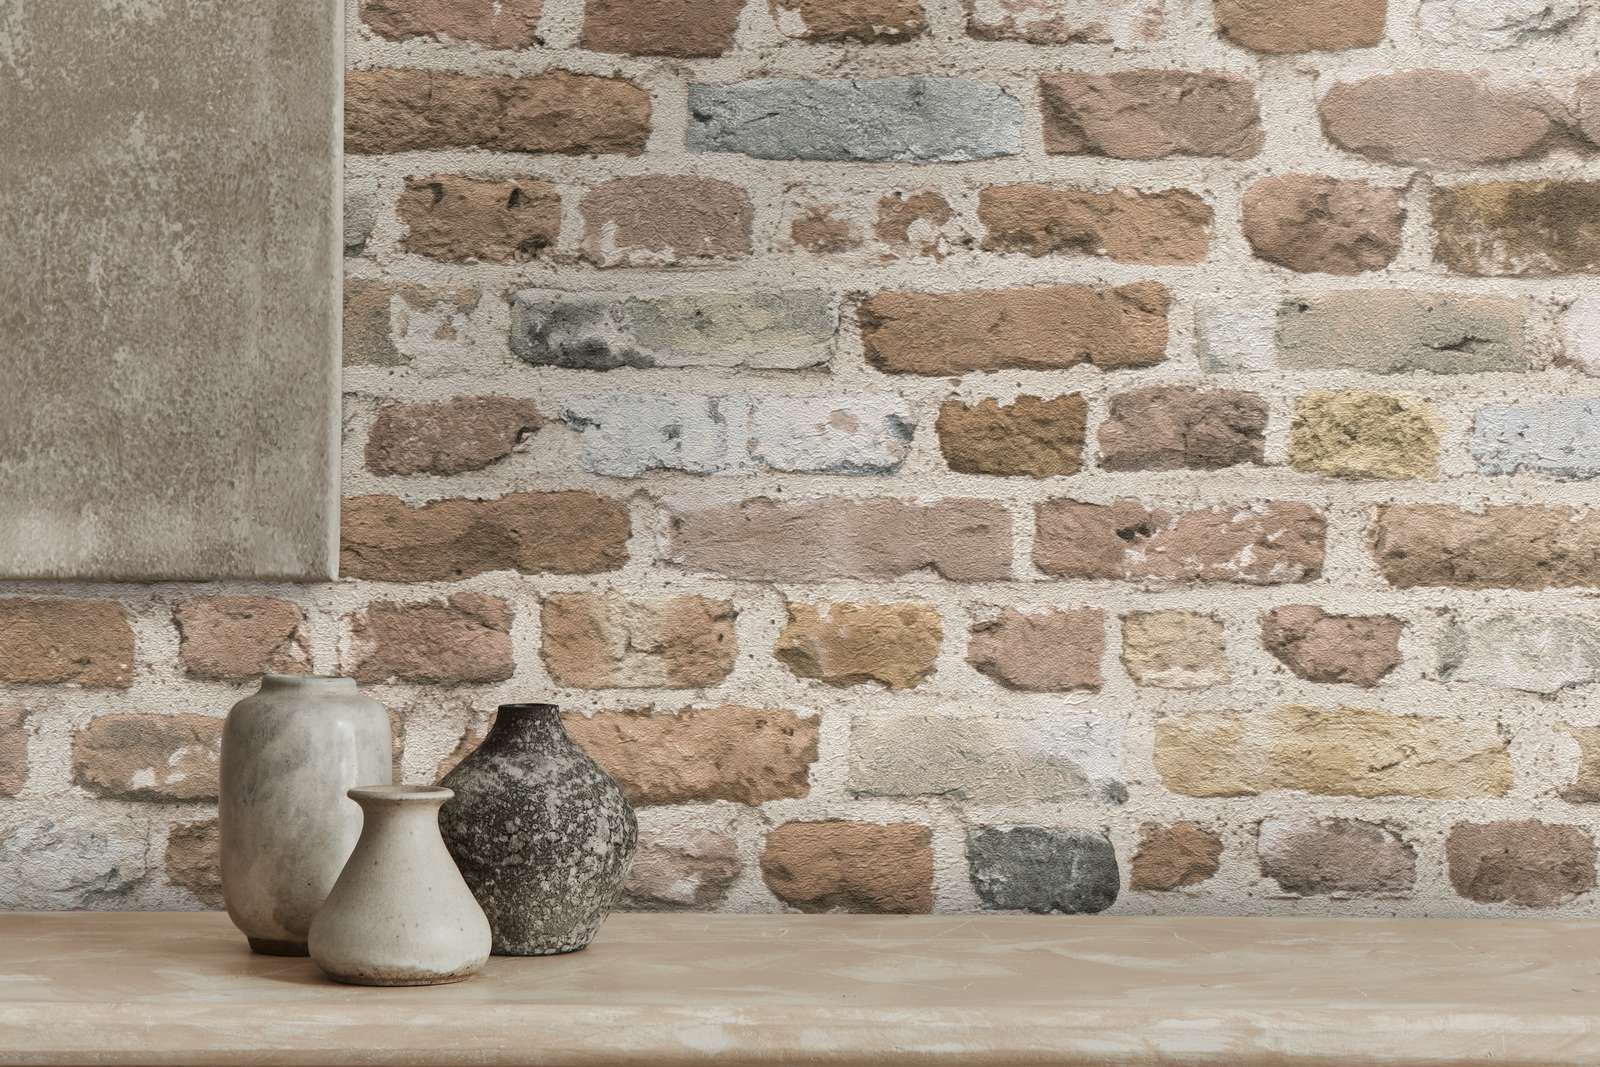             Brown stone wallpaper with brick wall look - brown, grey
        